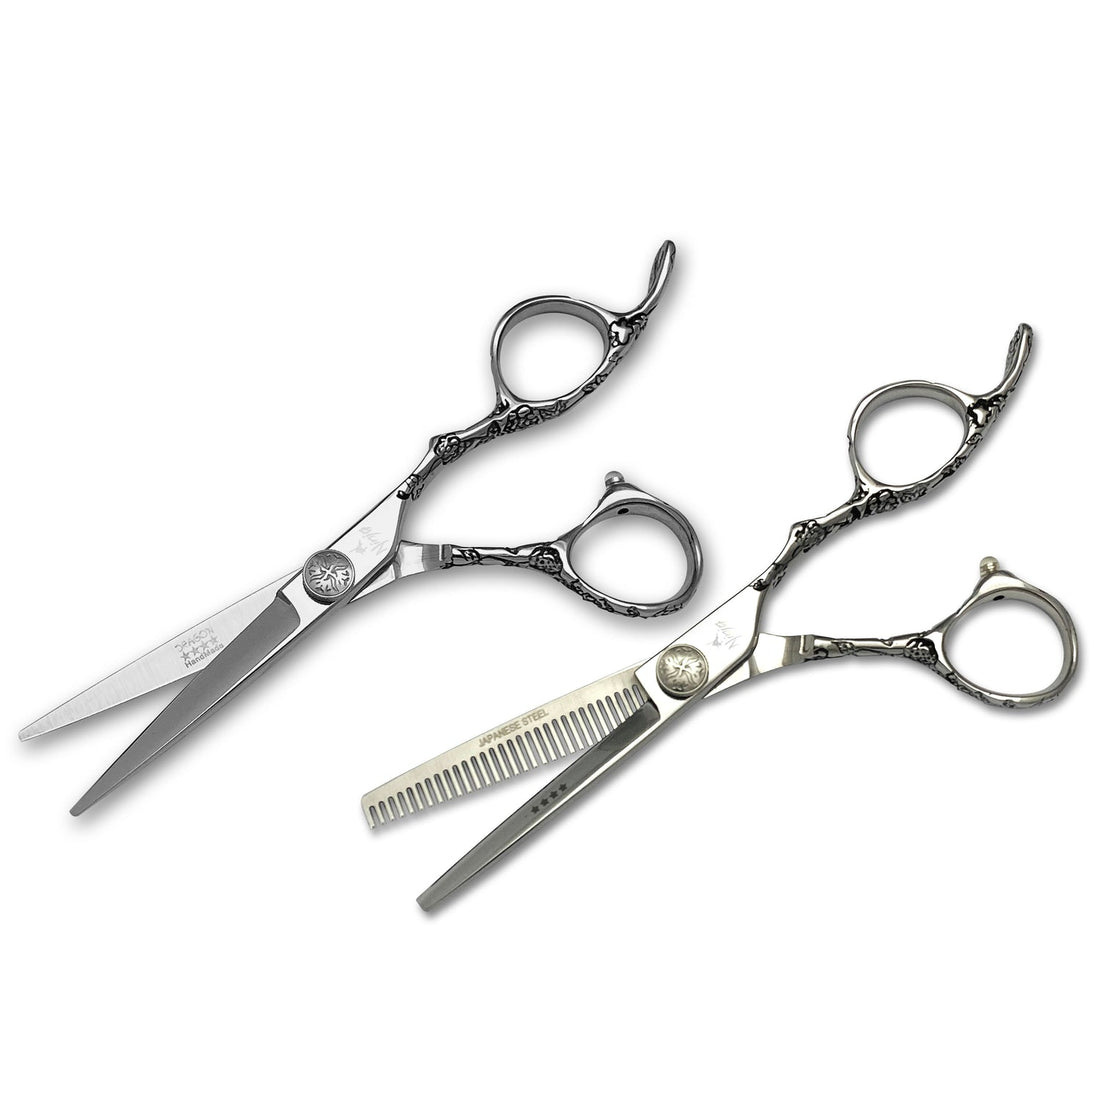 What is Professional Hair Cutting Scissors Called?